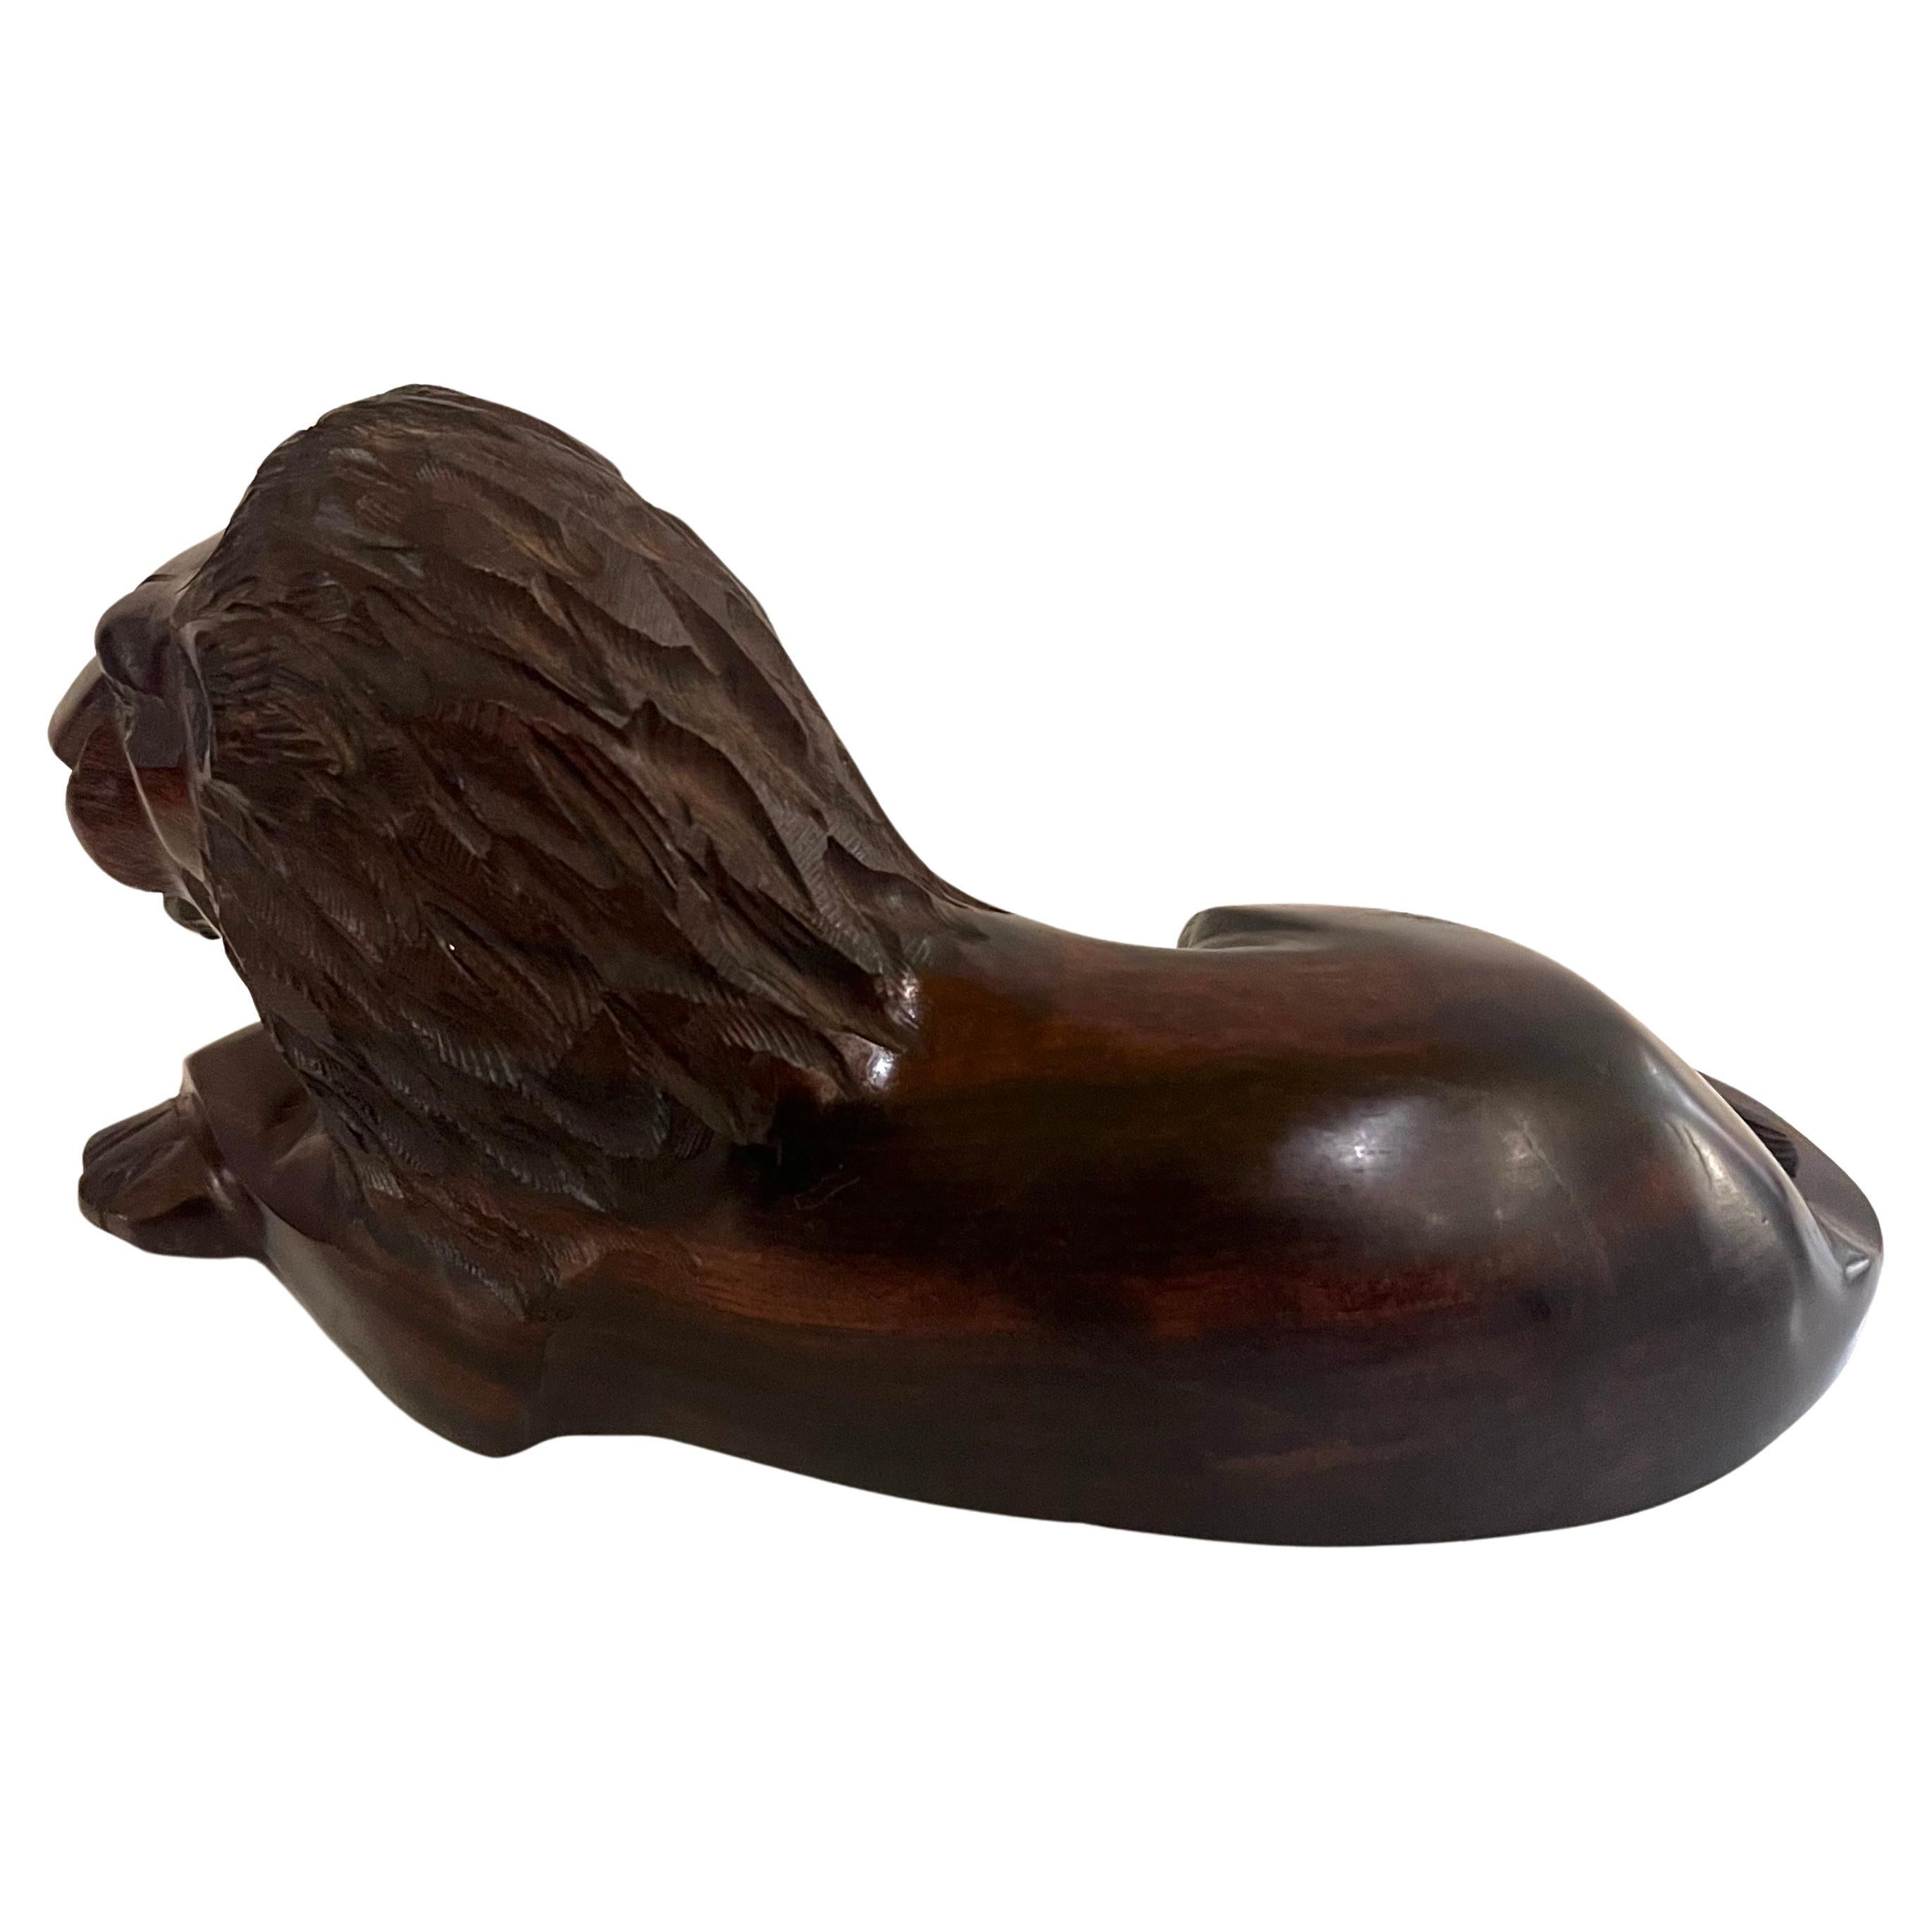 beautiful unique solid hand-carved ironwood lion sculpture with beautiful detail great condition and great subject, circa 1970's.